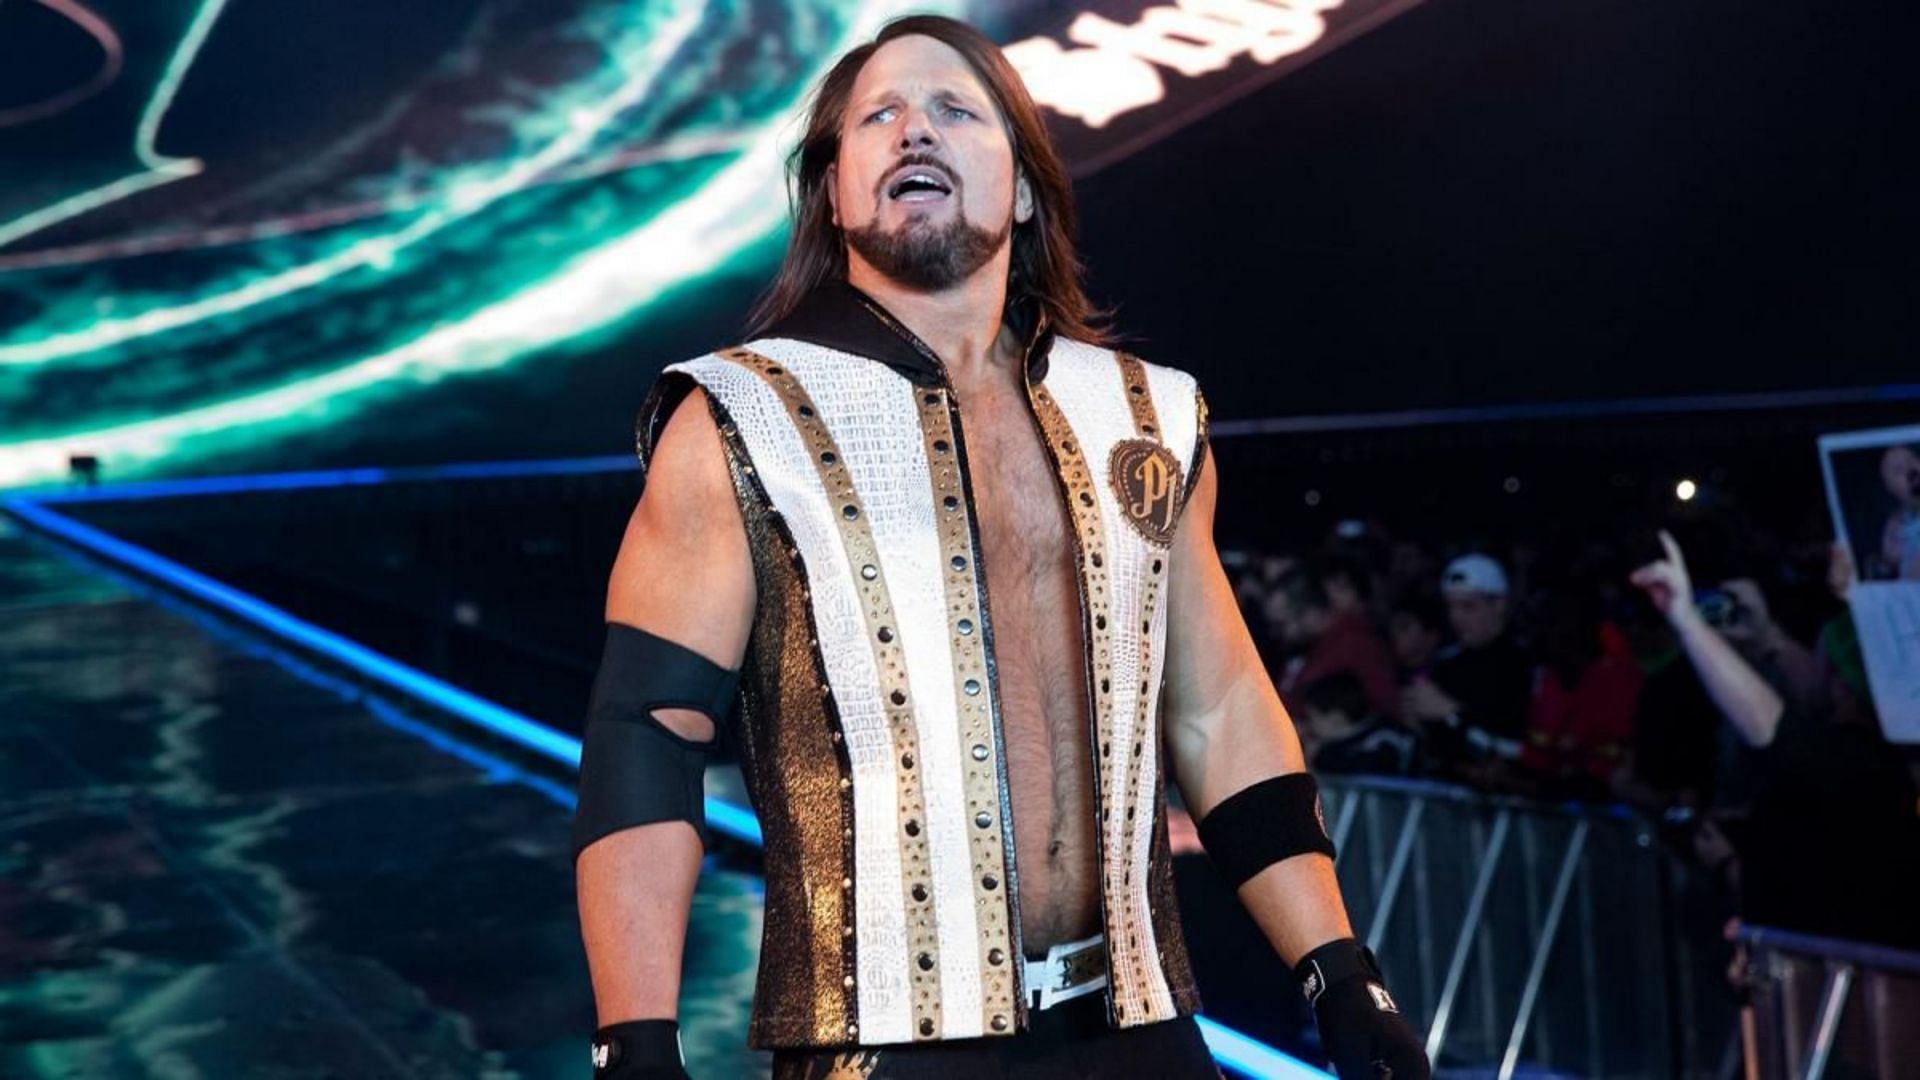 AJ Styles is currently feuding with The Judgement Day